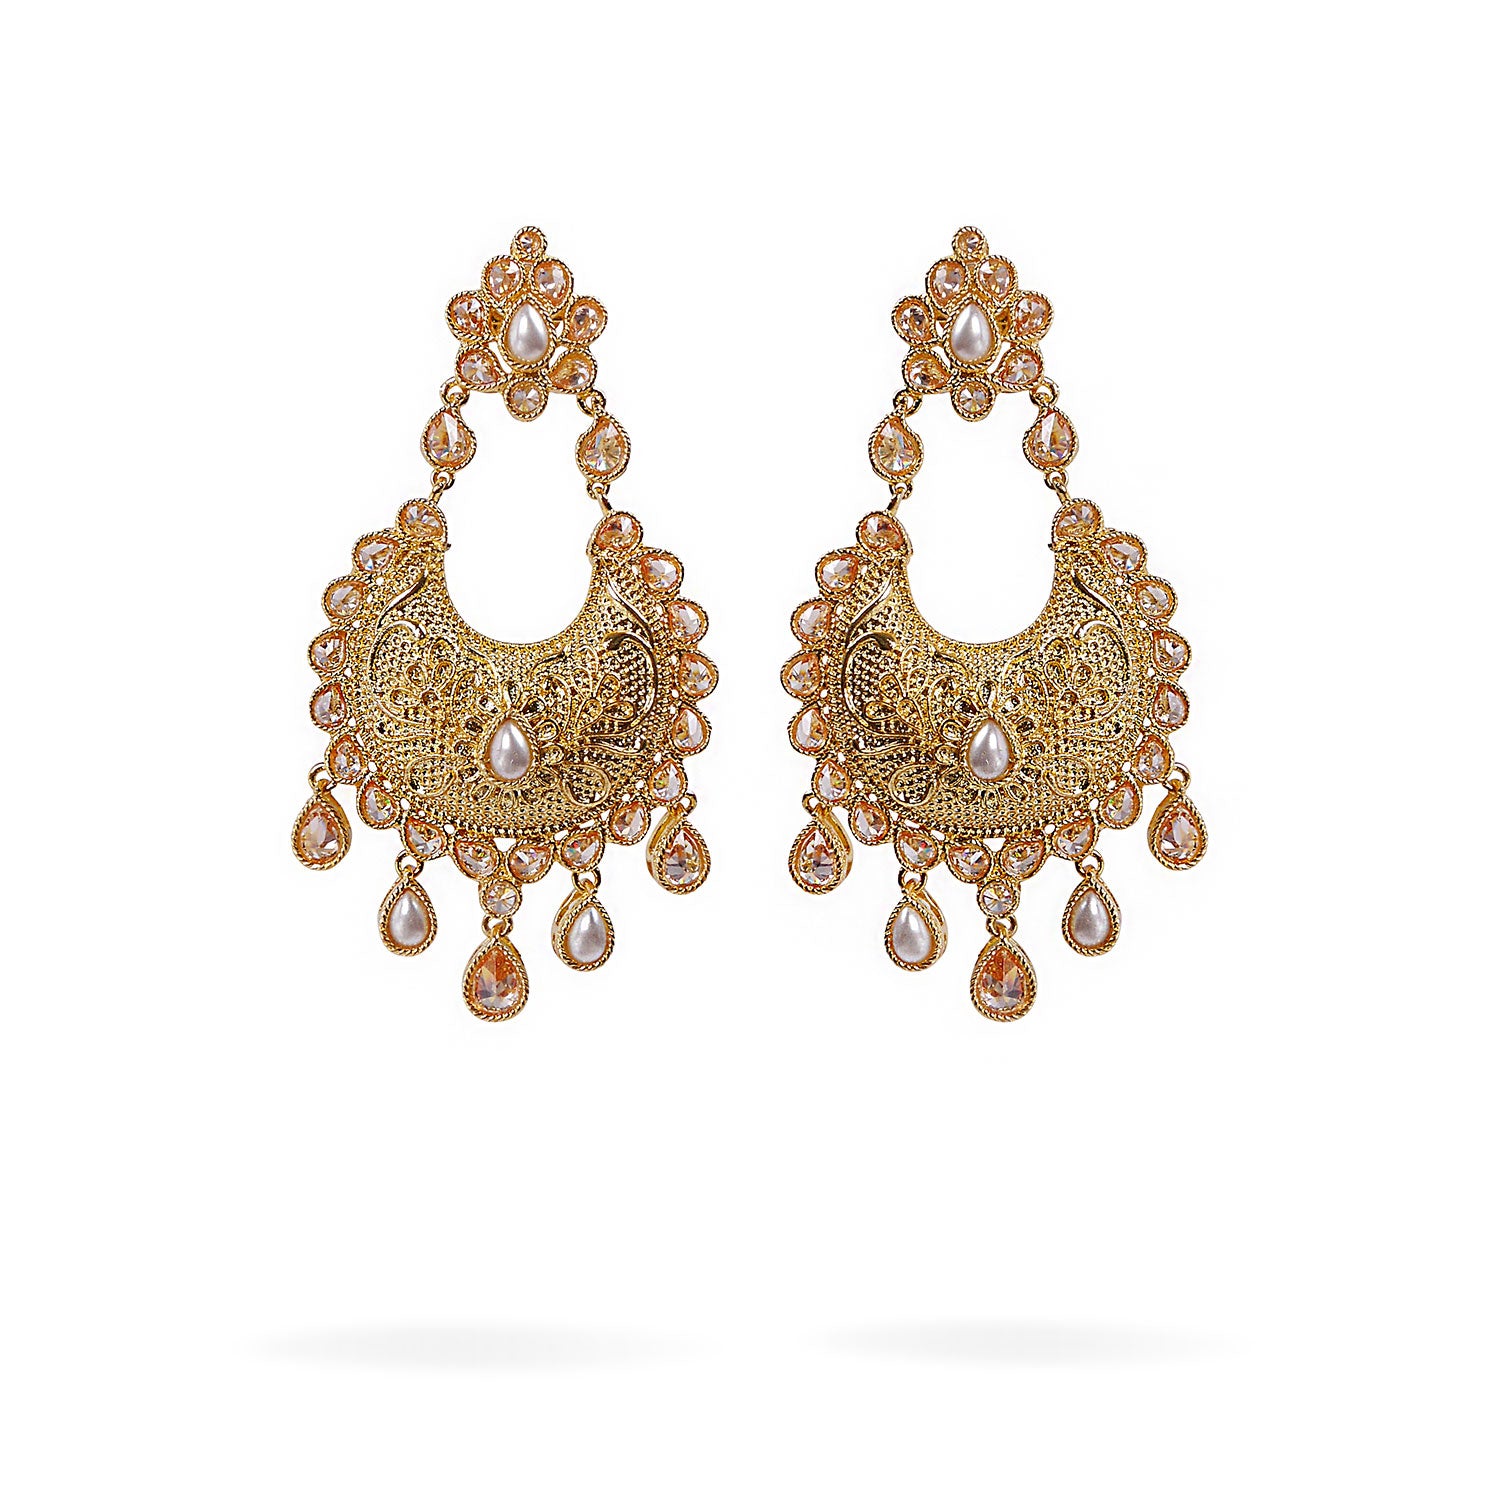 Avira Earrings in Pearl and Gold